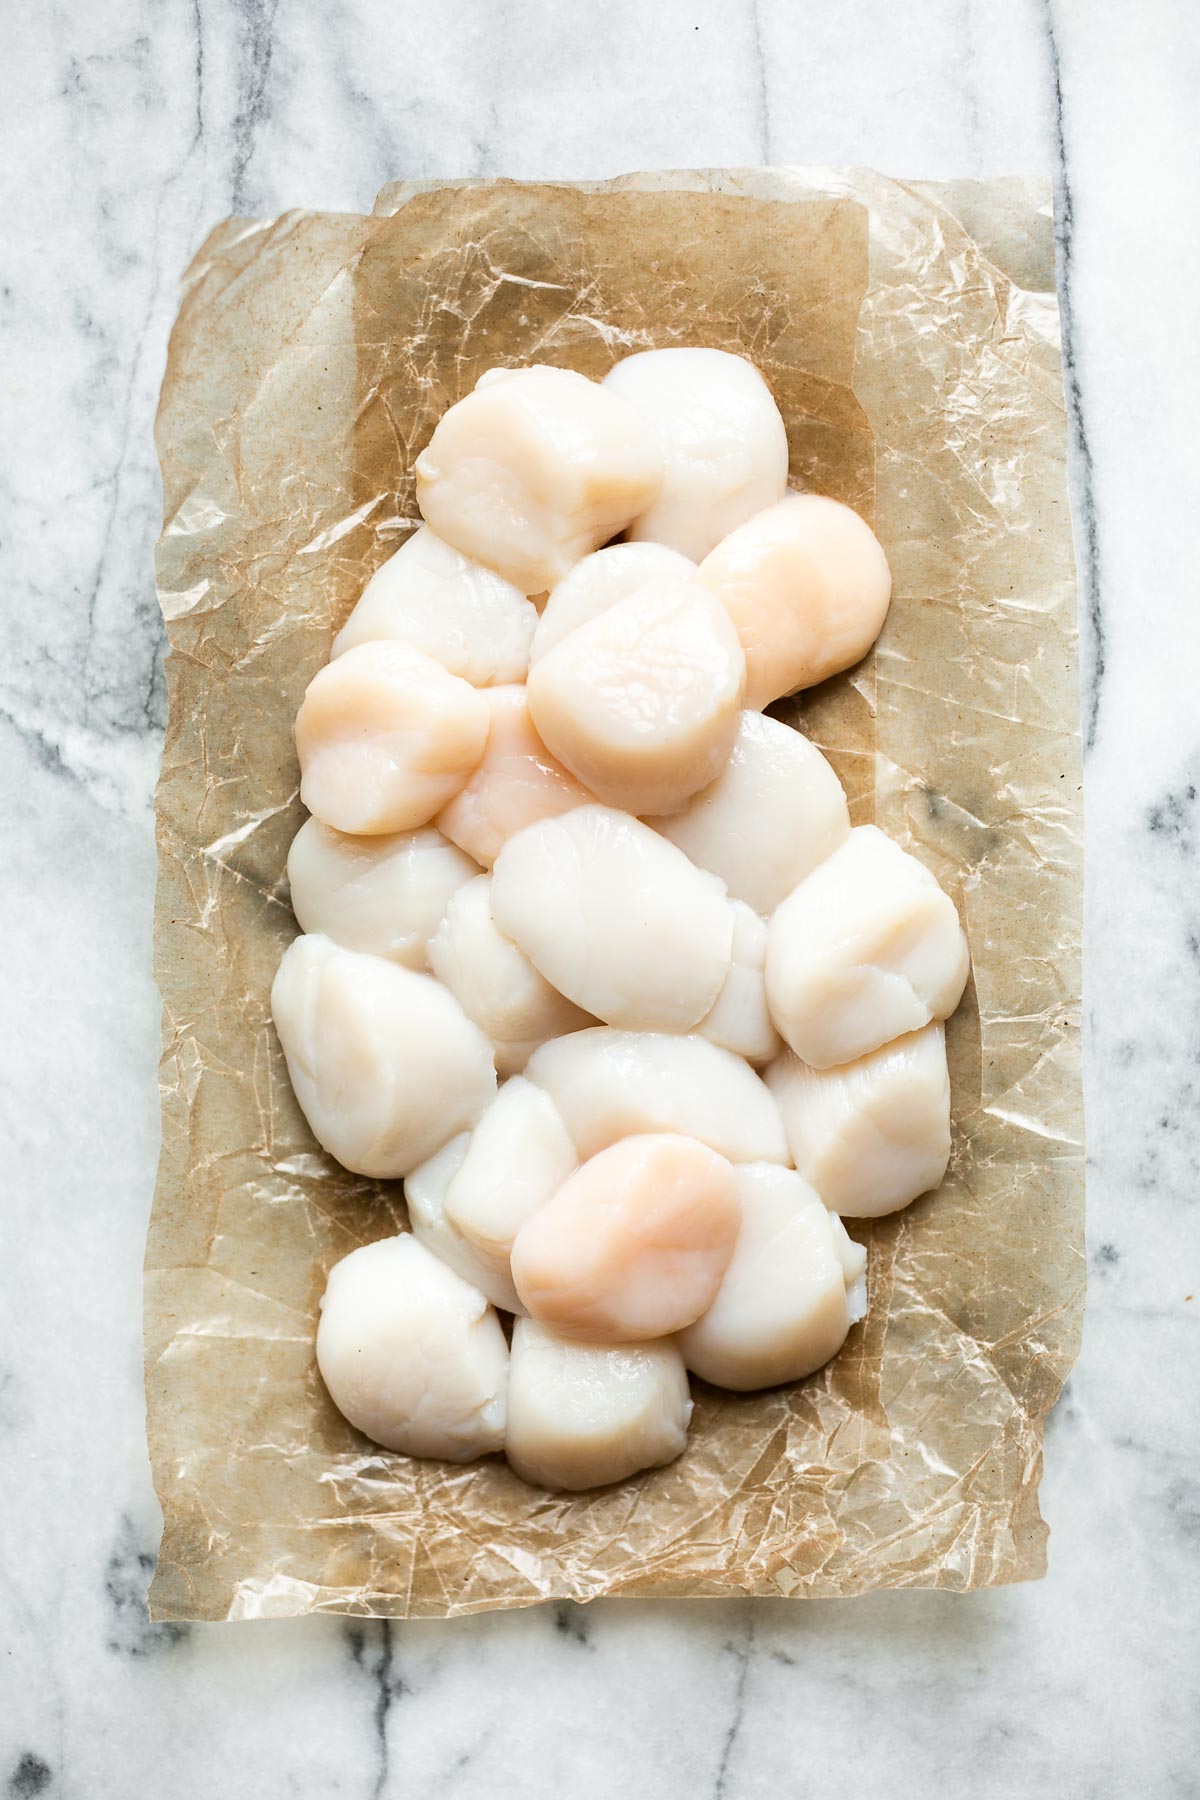 Cleaned sea scallops sitting atop parchment paper on a white marble surface.